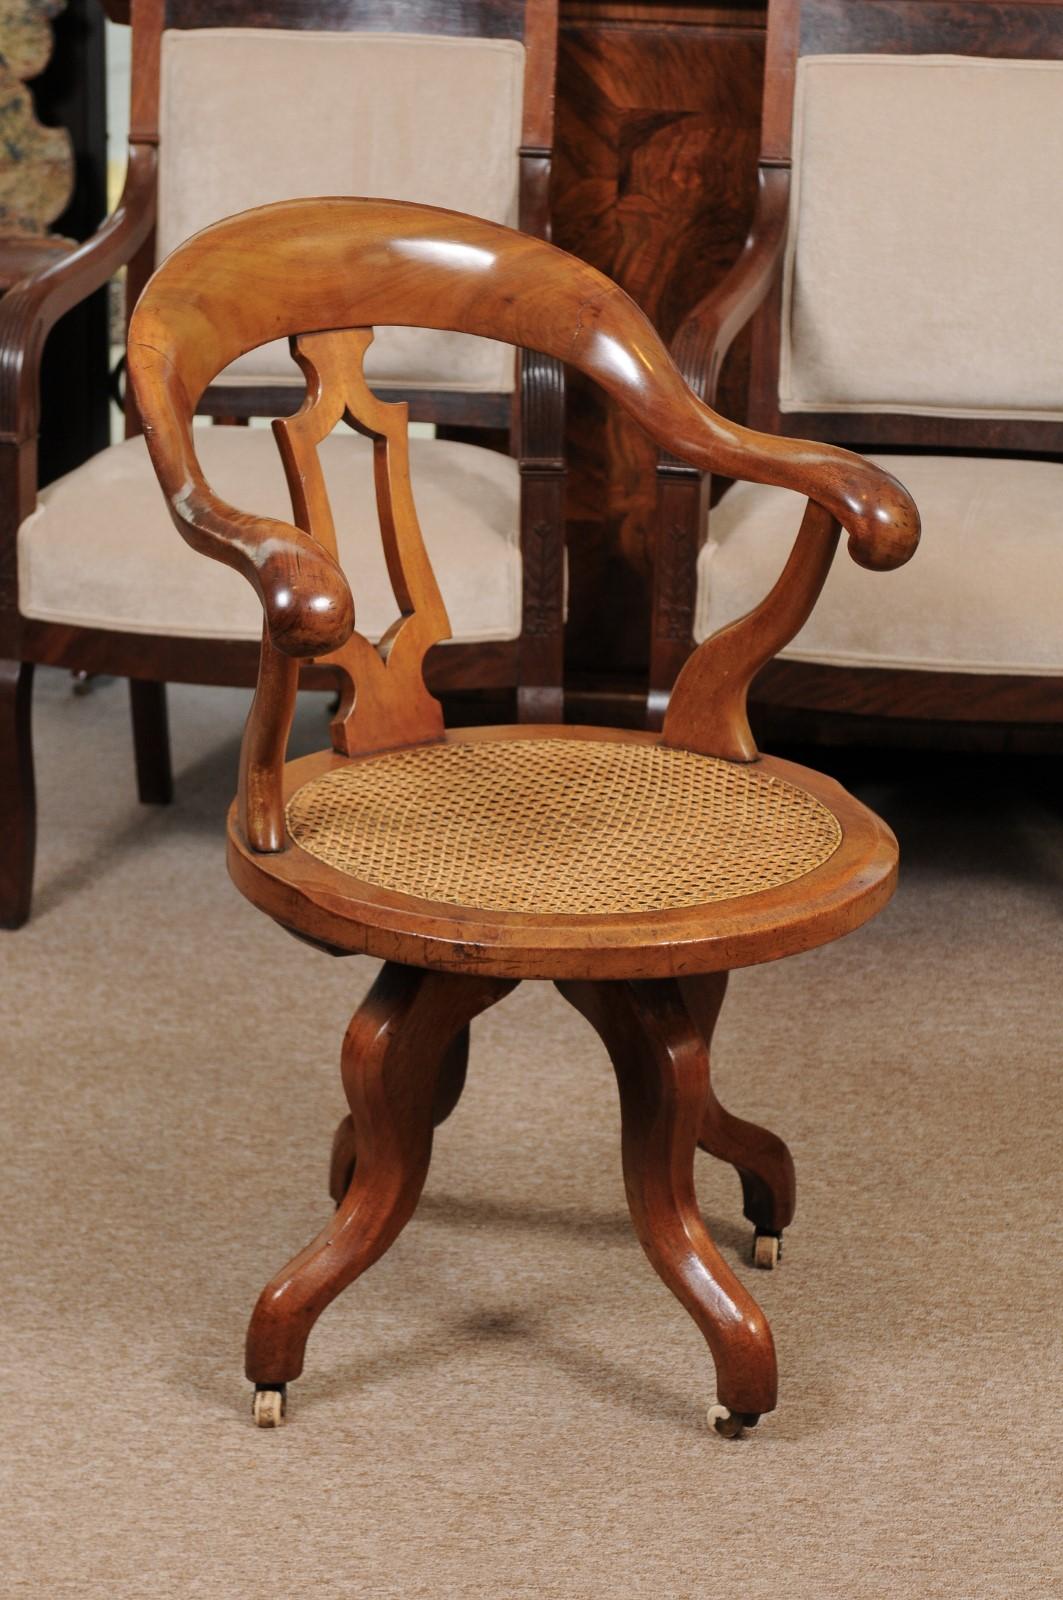 Late 19th century English Victorian swivel desk chair with caned seat.